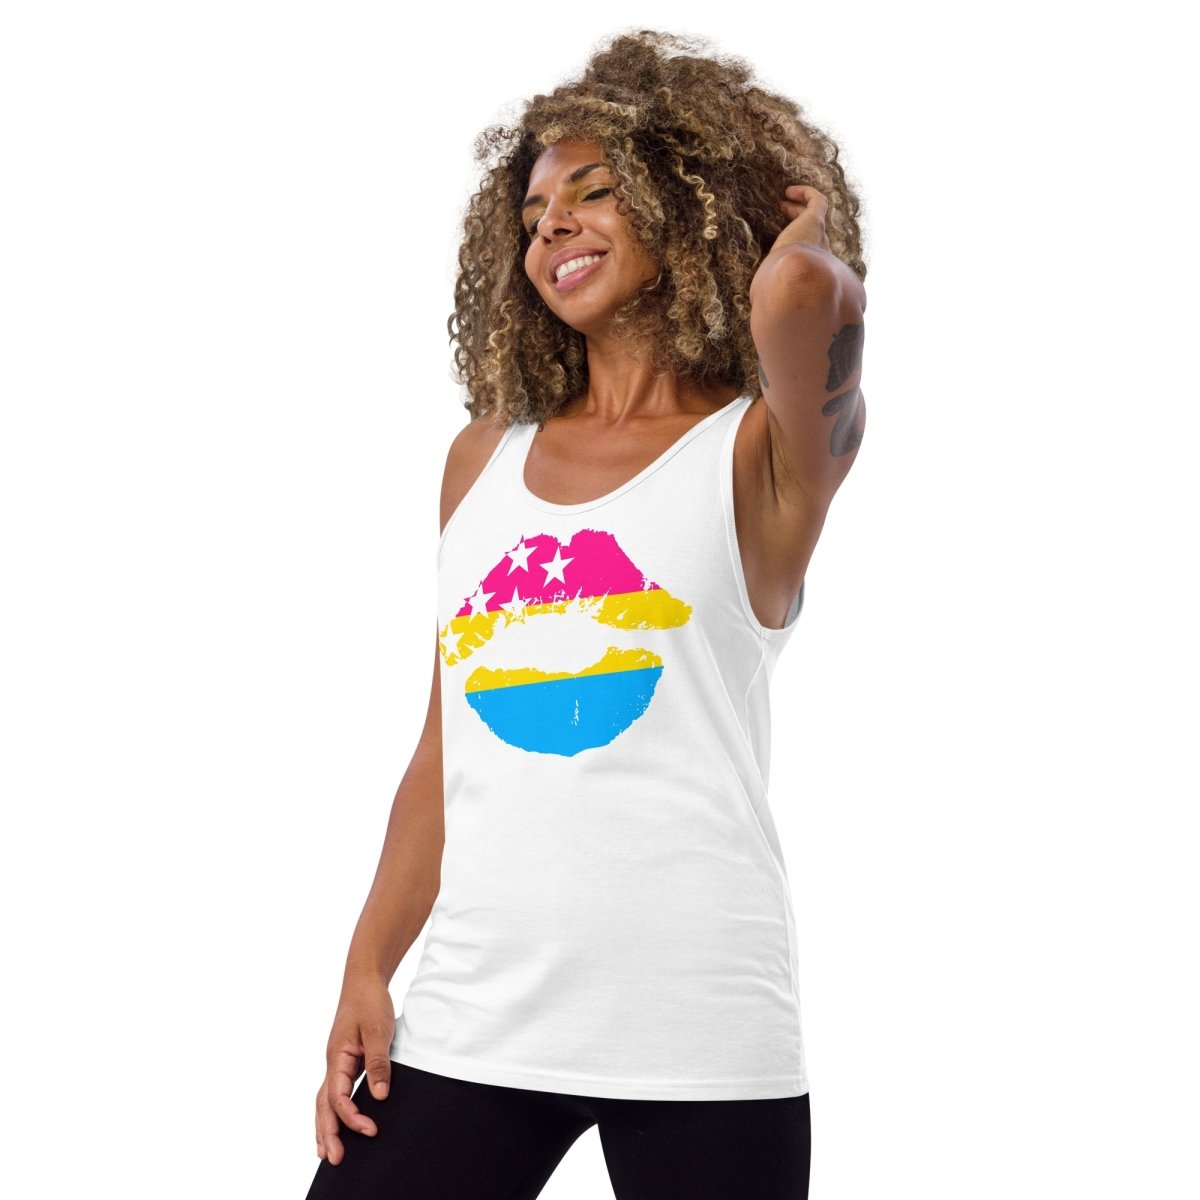 Pansexual Flag Lips Tank Top - On Trend Shirts